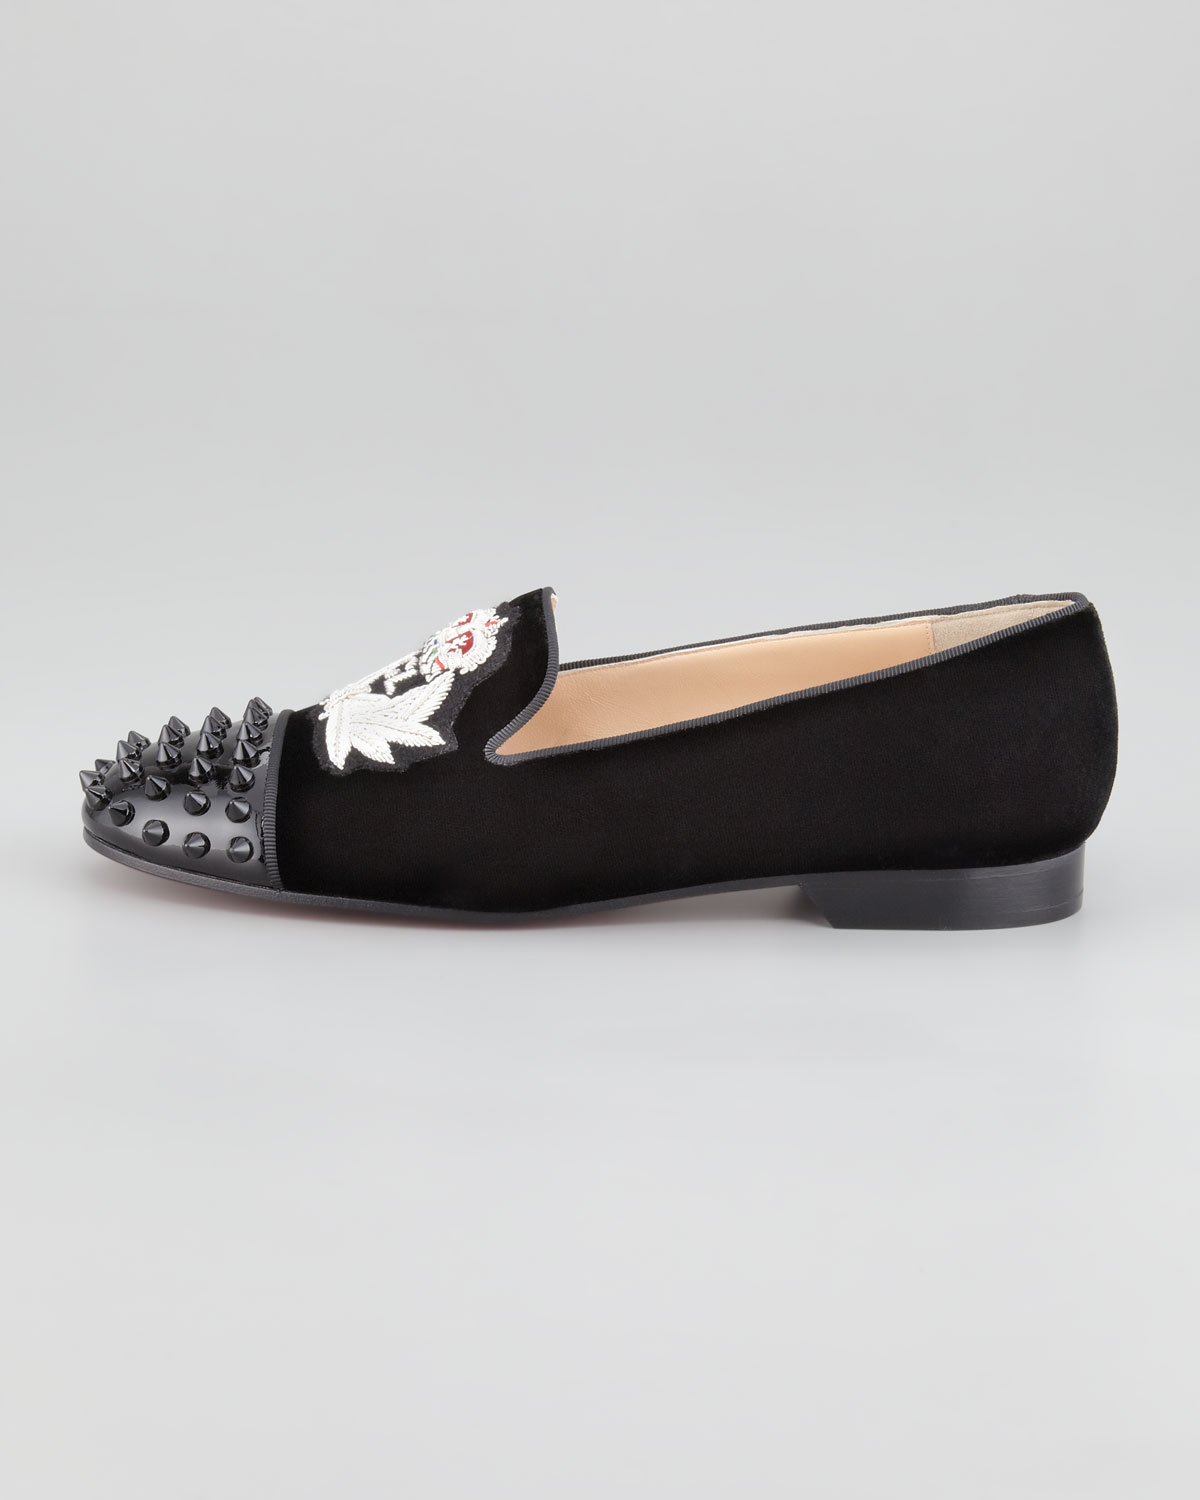 la boutine shoes - christian louboutin Intern loafers Red suede tonal studs ...